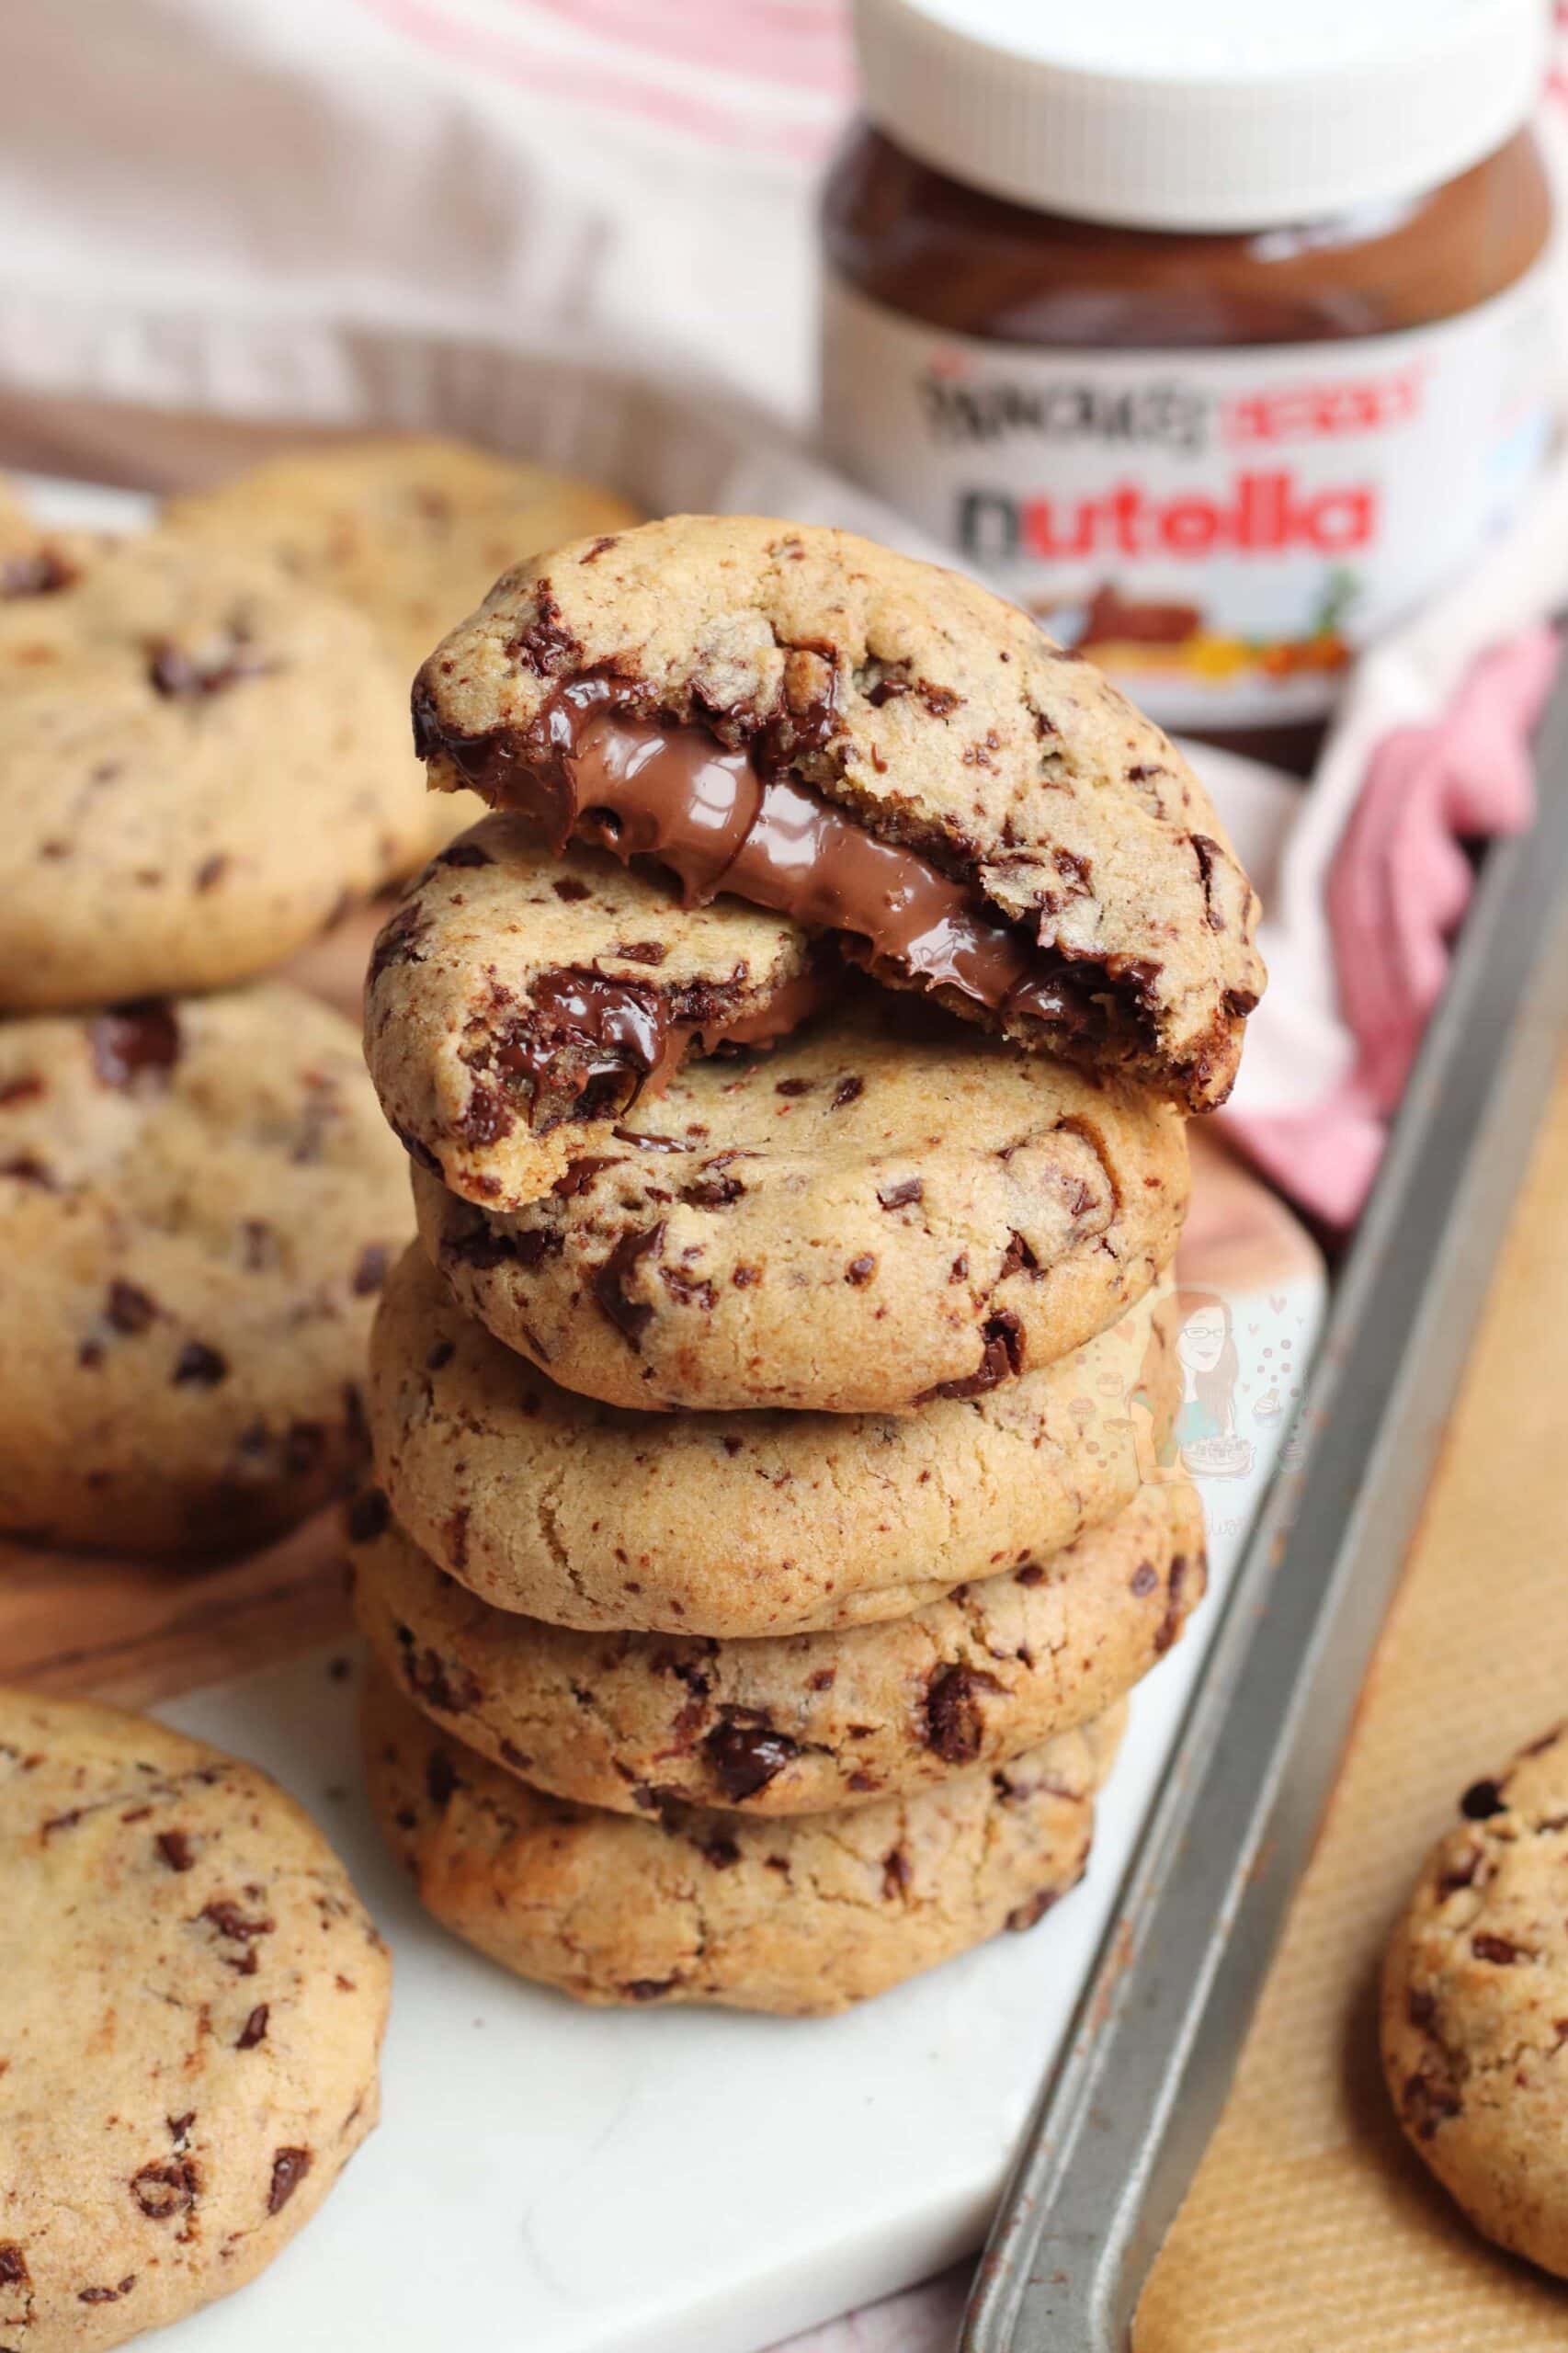 NEW Nutella Biscuits Cookies Filled With Hazelnut Spread Chocolate Snack  Pack